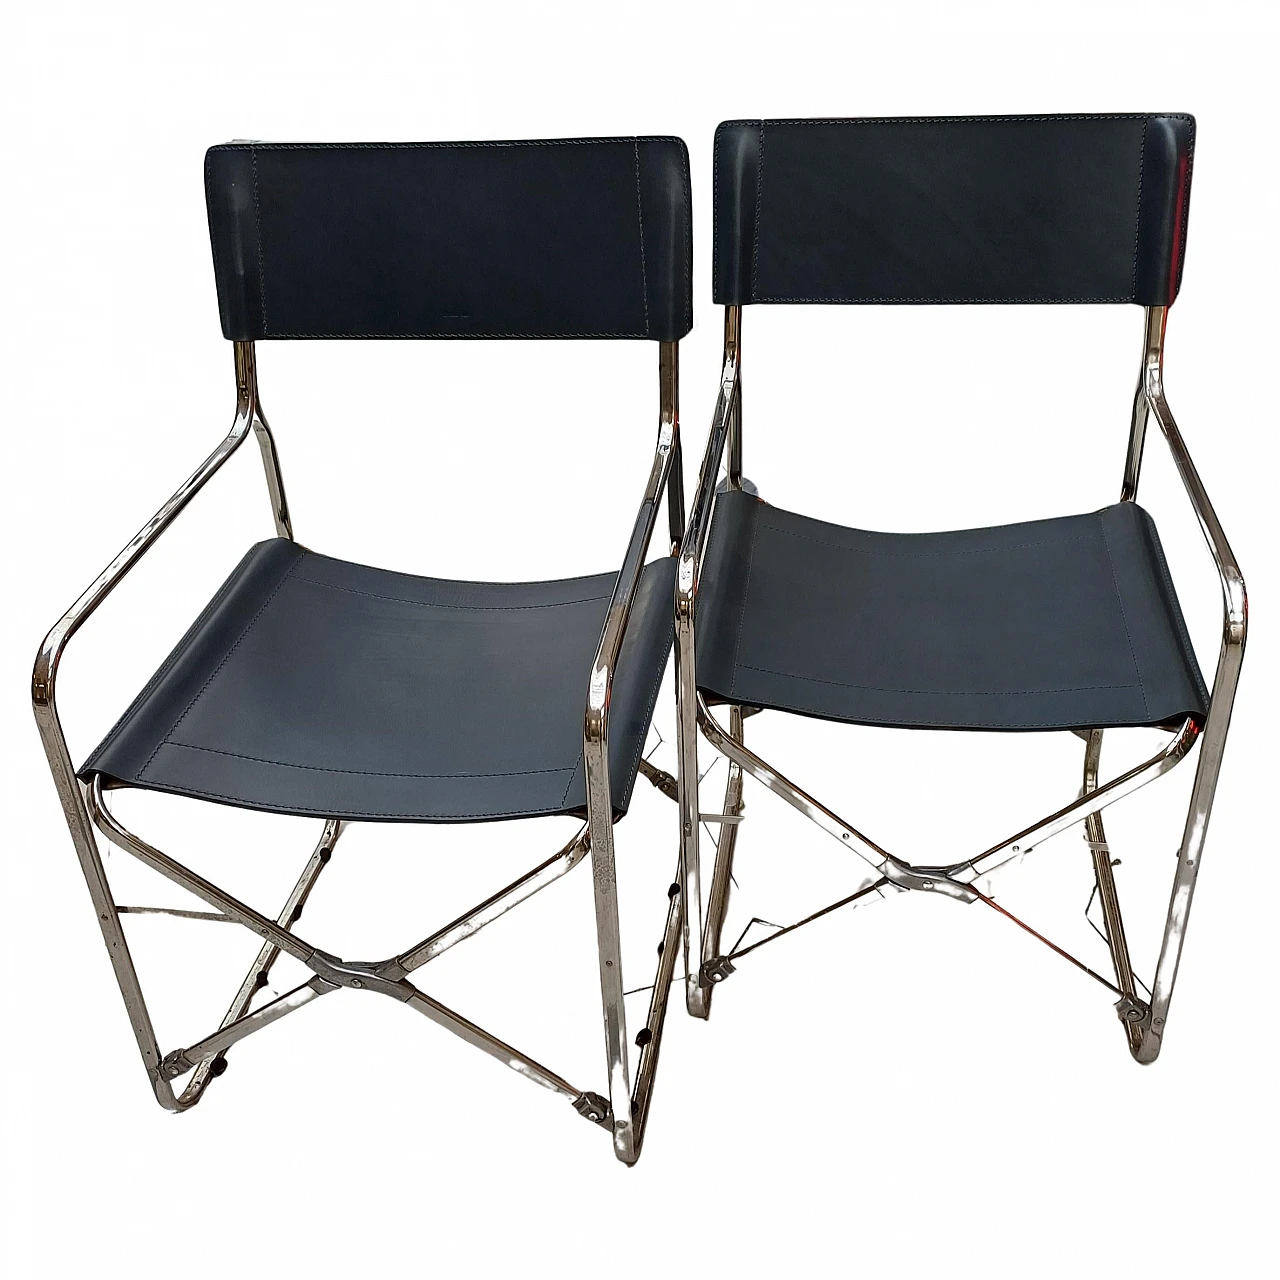 Pair of April folding chairs by Gae Aulenti for Zanotta 1